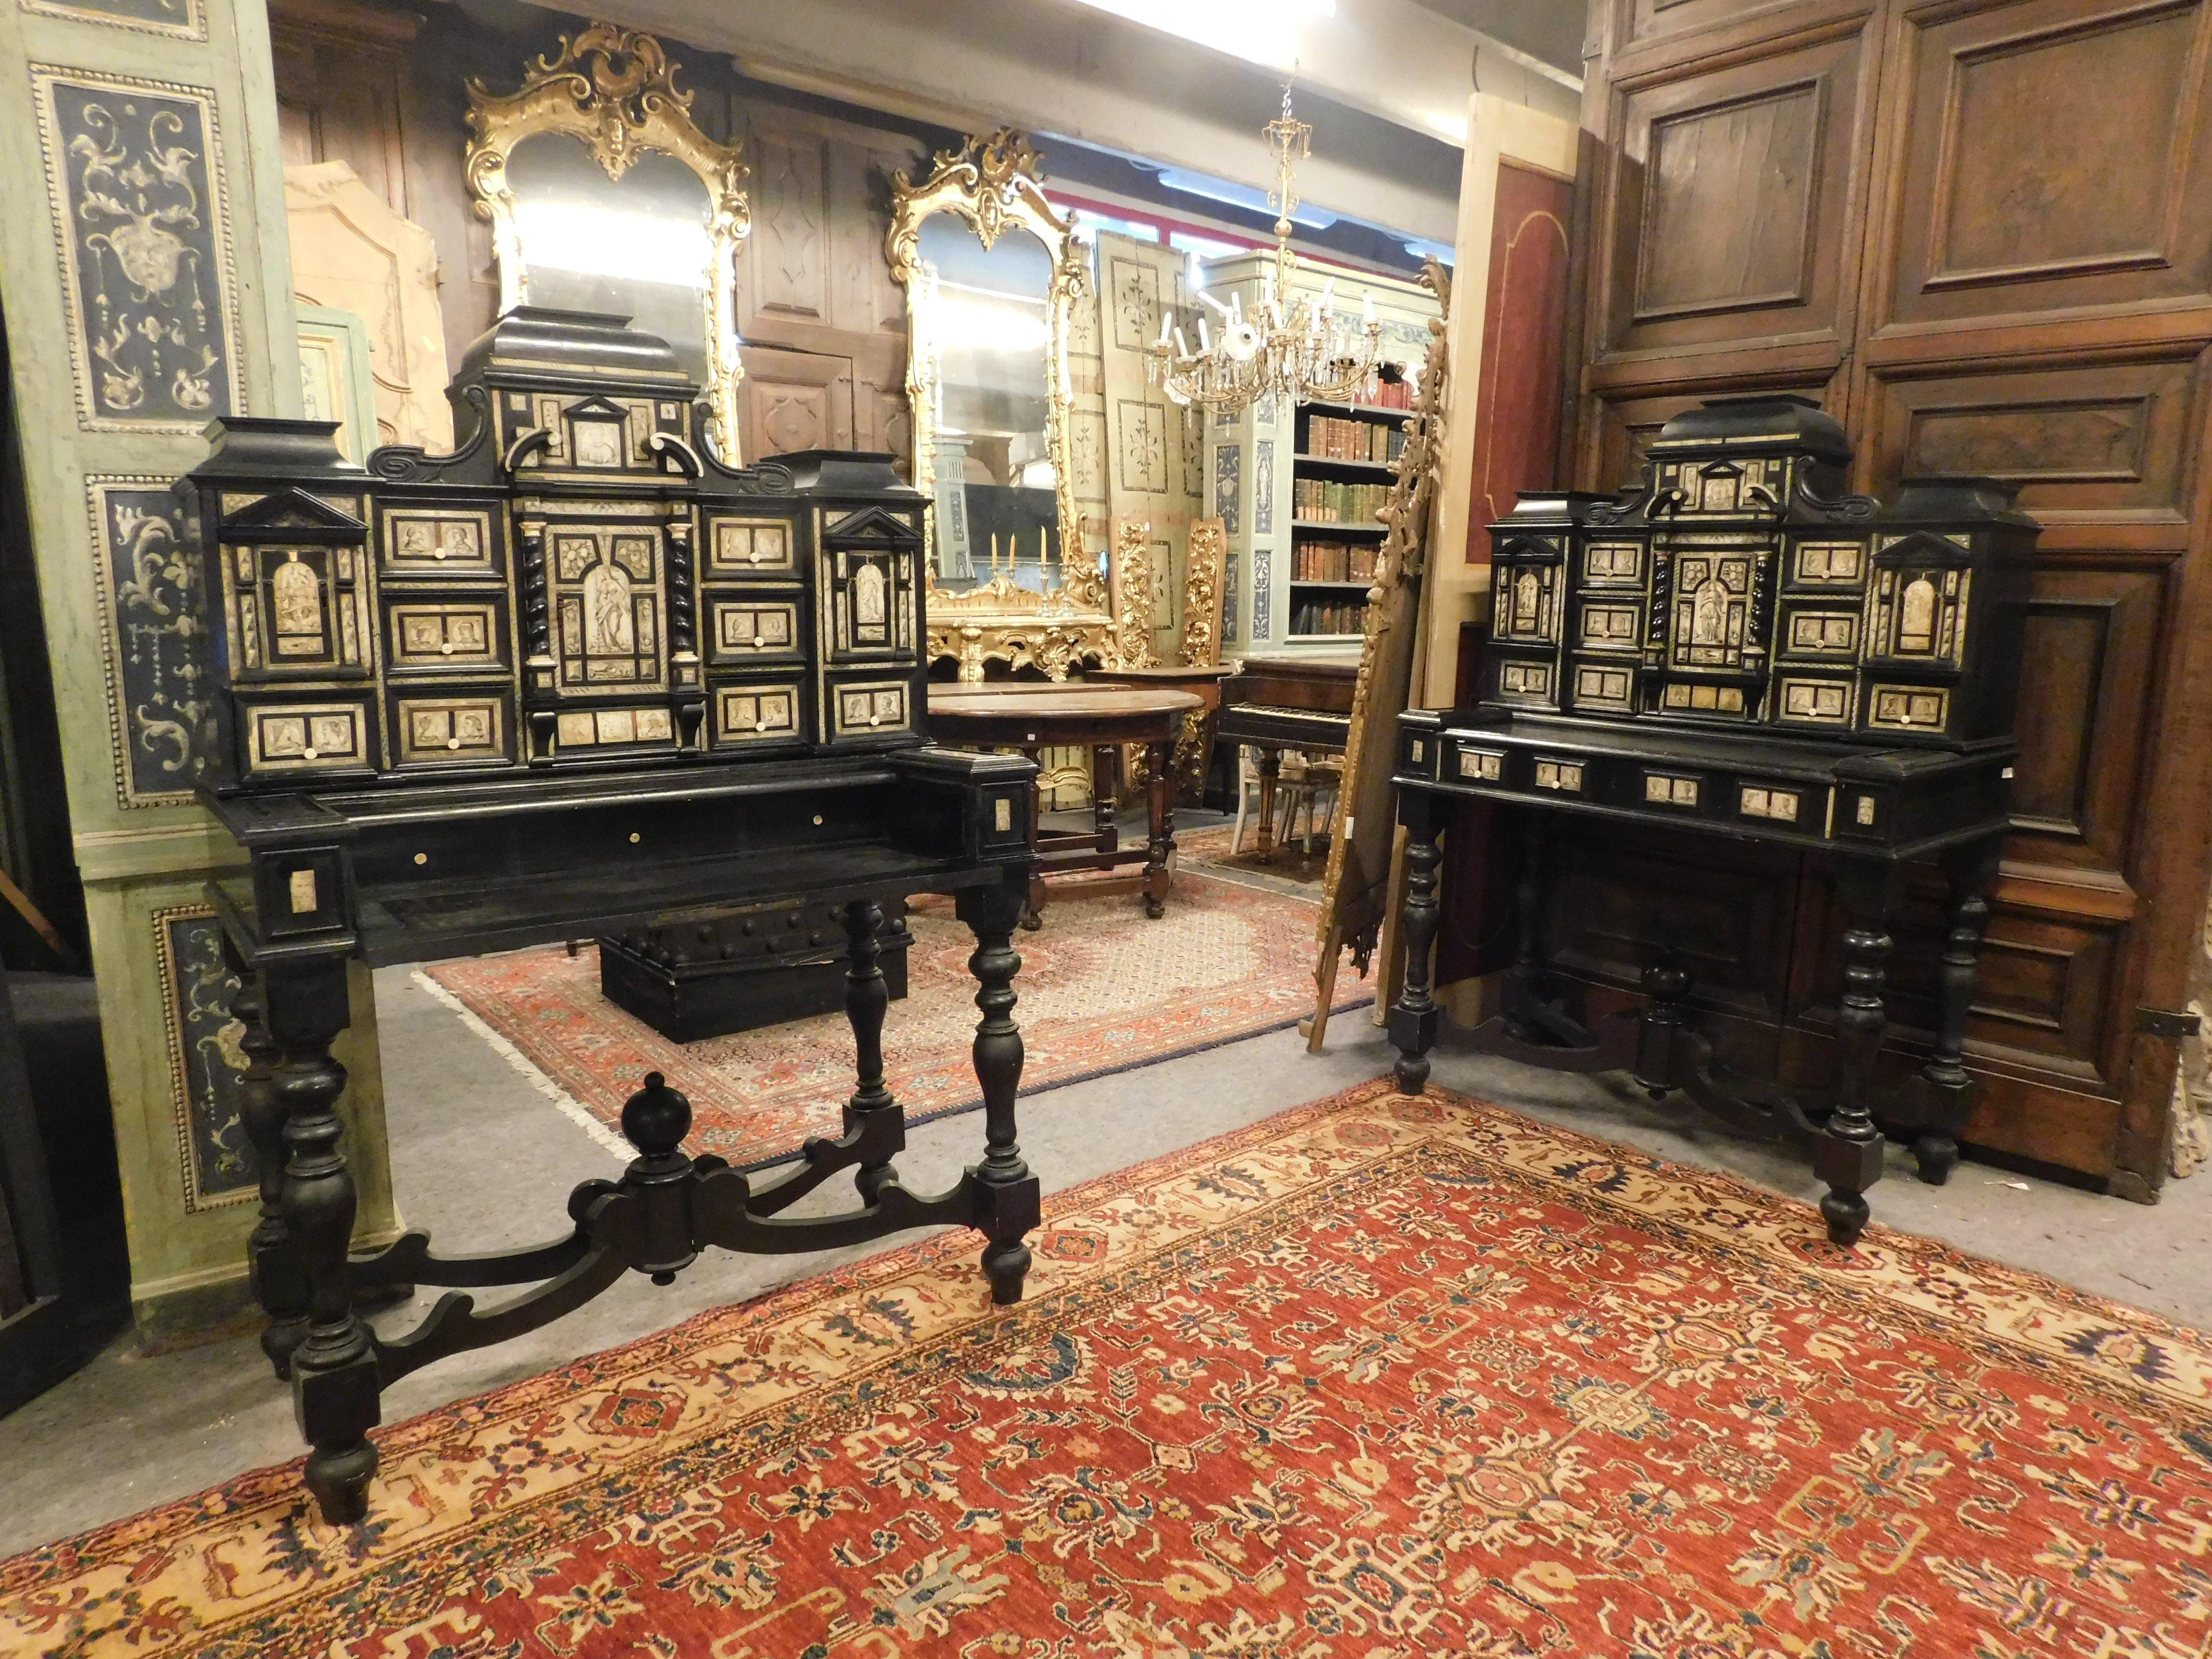 Ancient pair of solid wood coin cabinets, richly inlaid and shaped, with many front drawers and a central door with a temple shape, enriched by twisted columns and drawings of venus and beautiful classic decorations, they also have secret